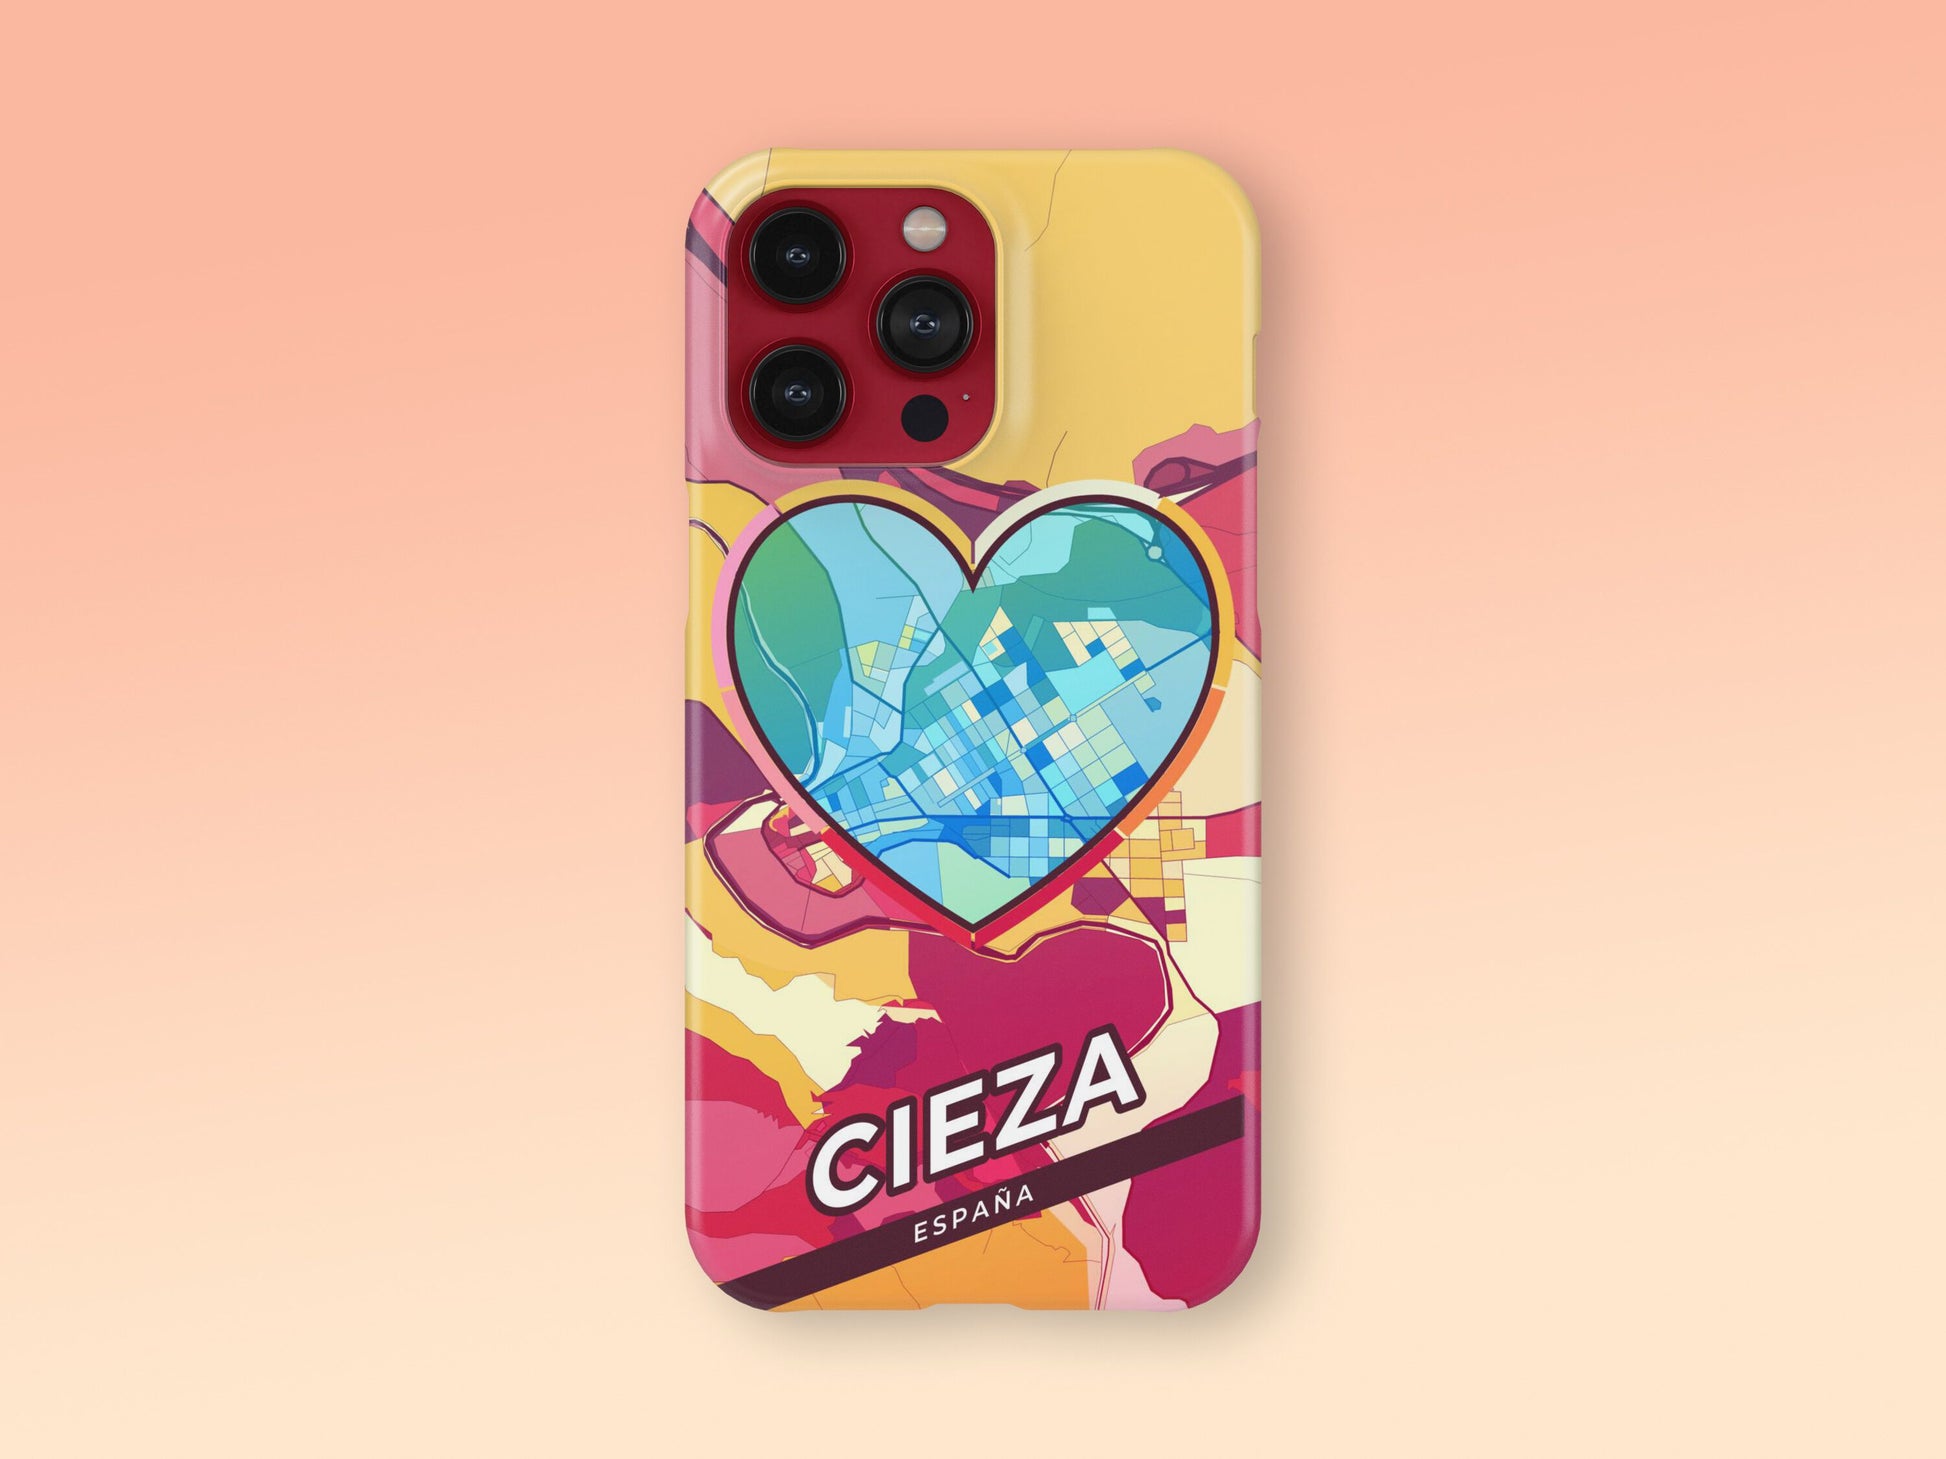 Cieza Spain slim phone case with colorful icon. Birthday, wedding or housewarming gift. Couple match cases. 2